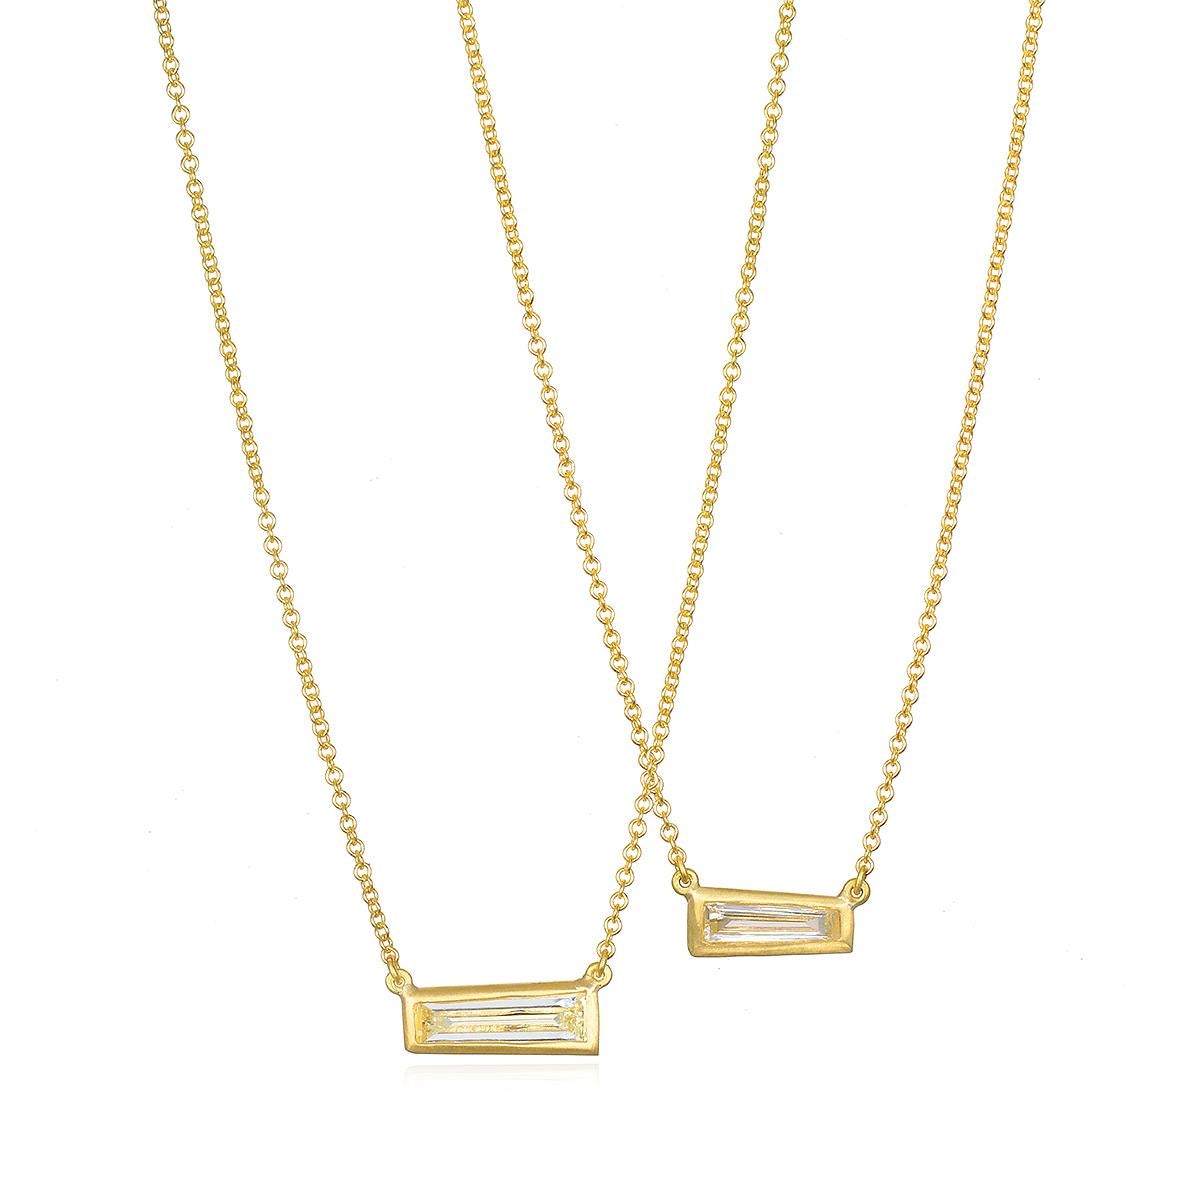 Faye Kim's 18K Gold* Tapered Diamond Bezel Necklace will add sparkle to any wardrobe and can be worn alone or layered with other necklaces. 

*In Faye Kim's signature 18k green gold, an alloy comprising 75% pure gold and 25% silver.
Customizable in